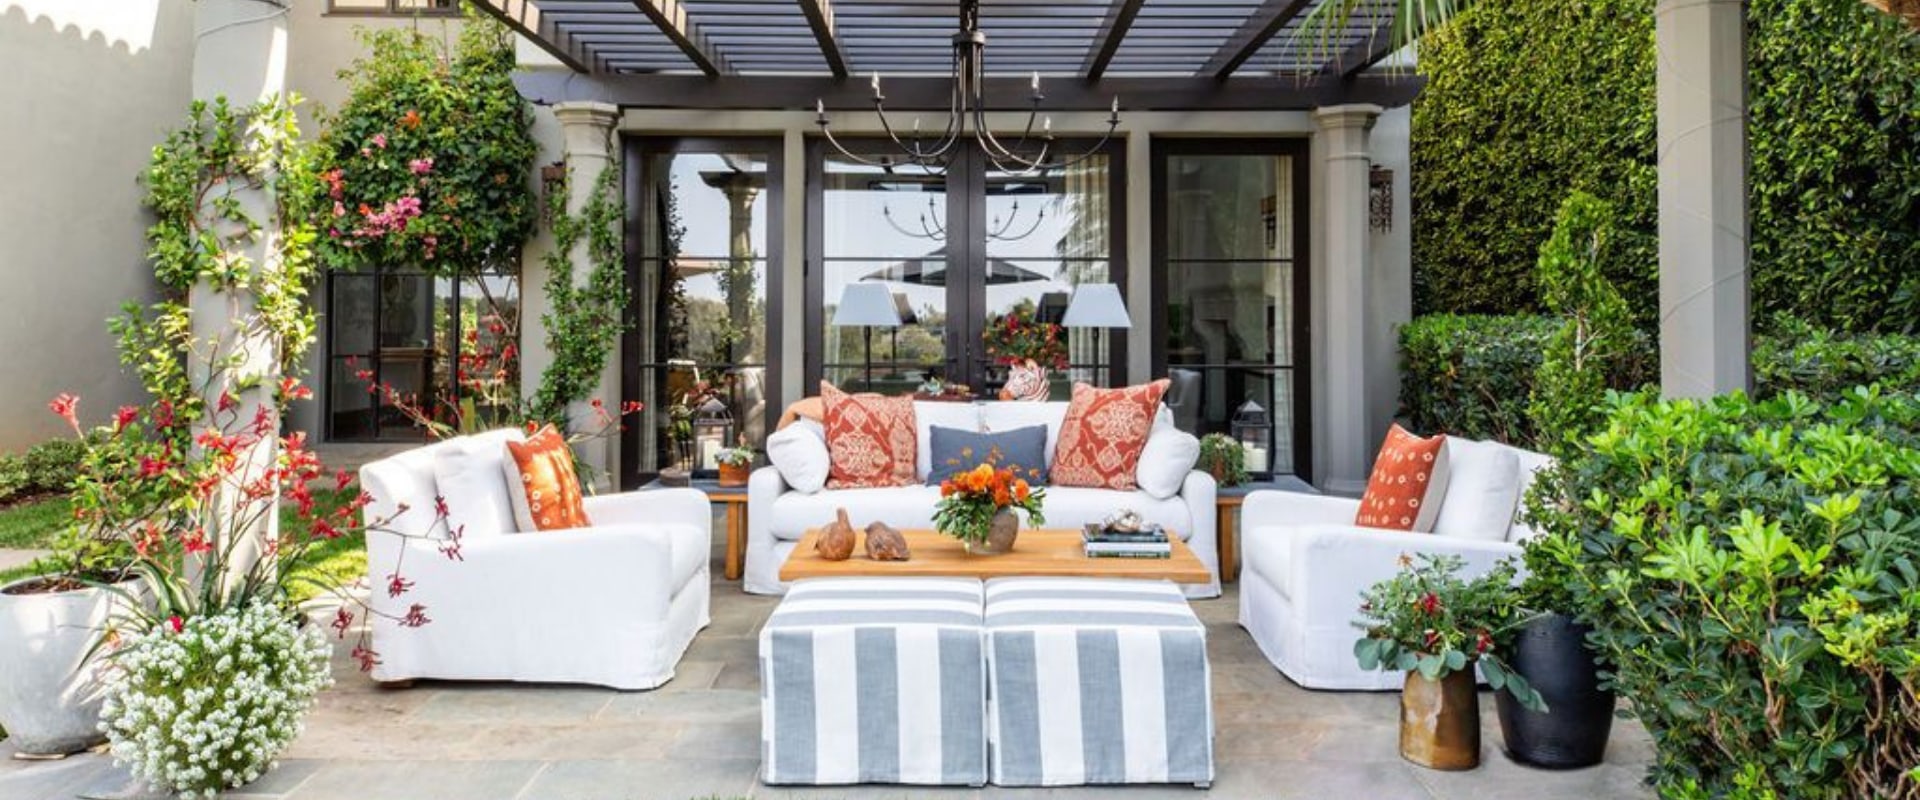 Creating a Functional Outdoor Living Space: How to Improve Your Home's Exterior